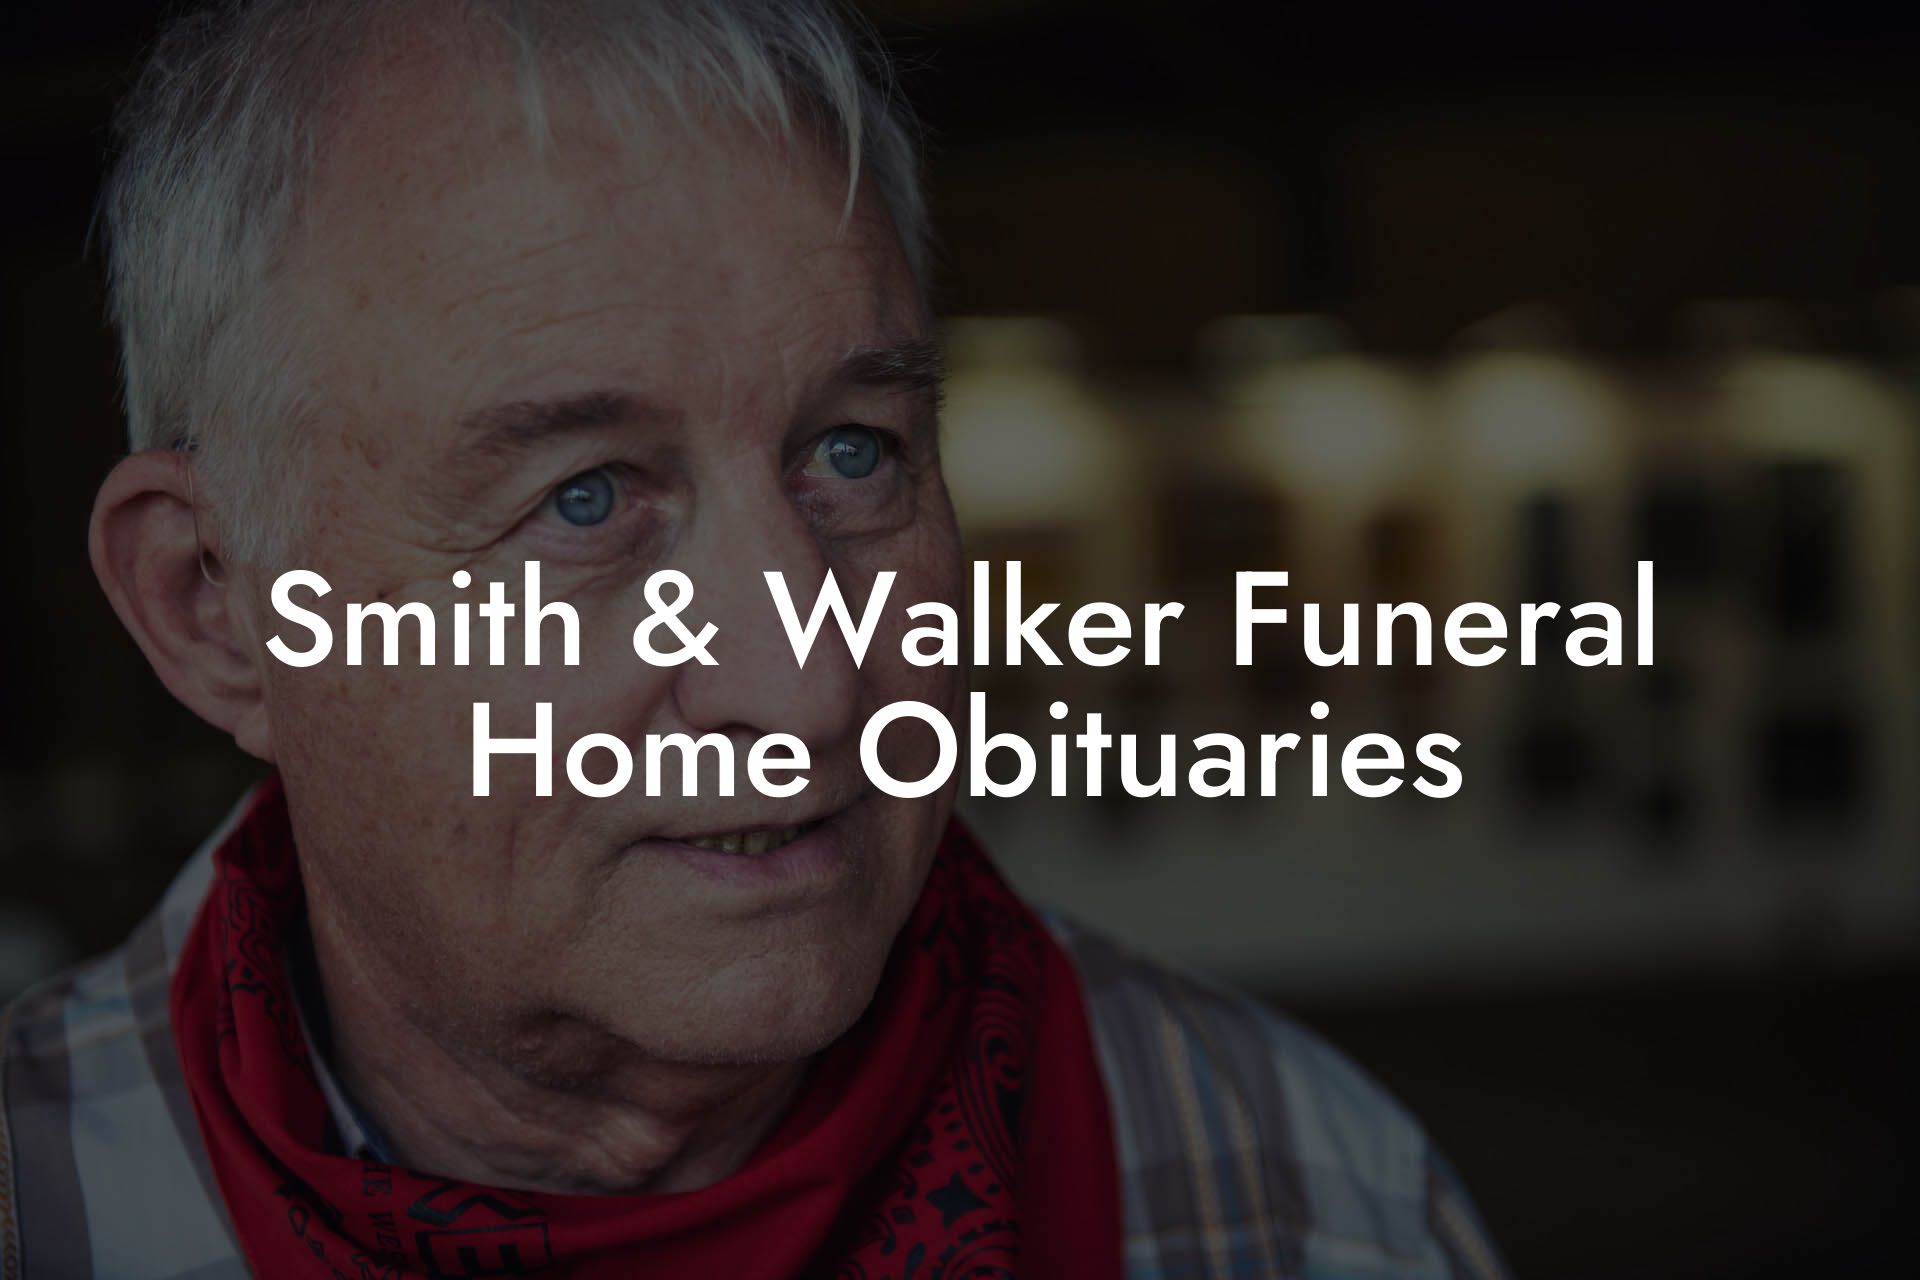 Smith & Walker Funeral Home Obituaries